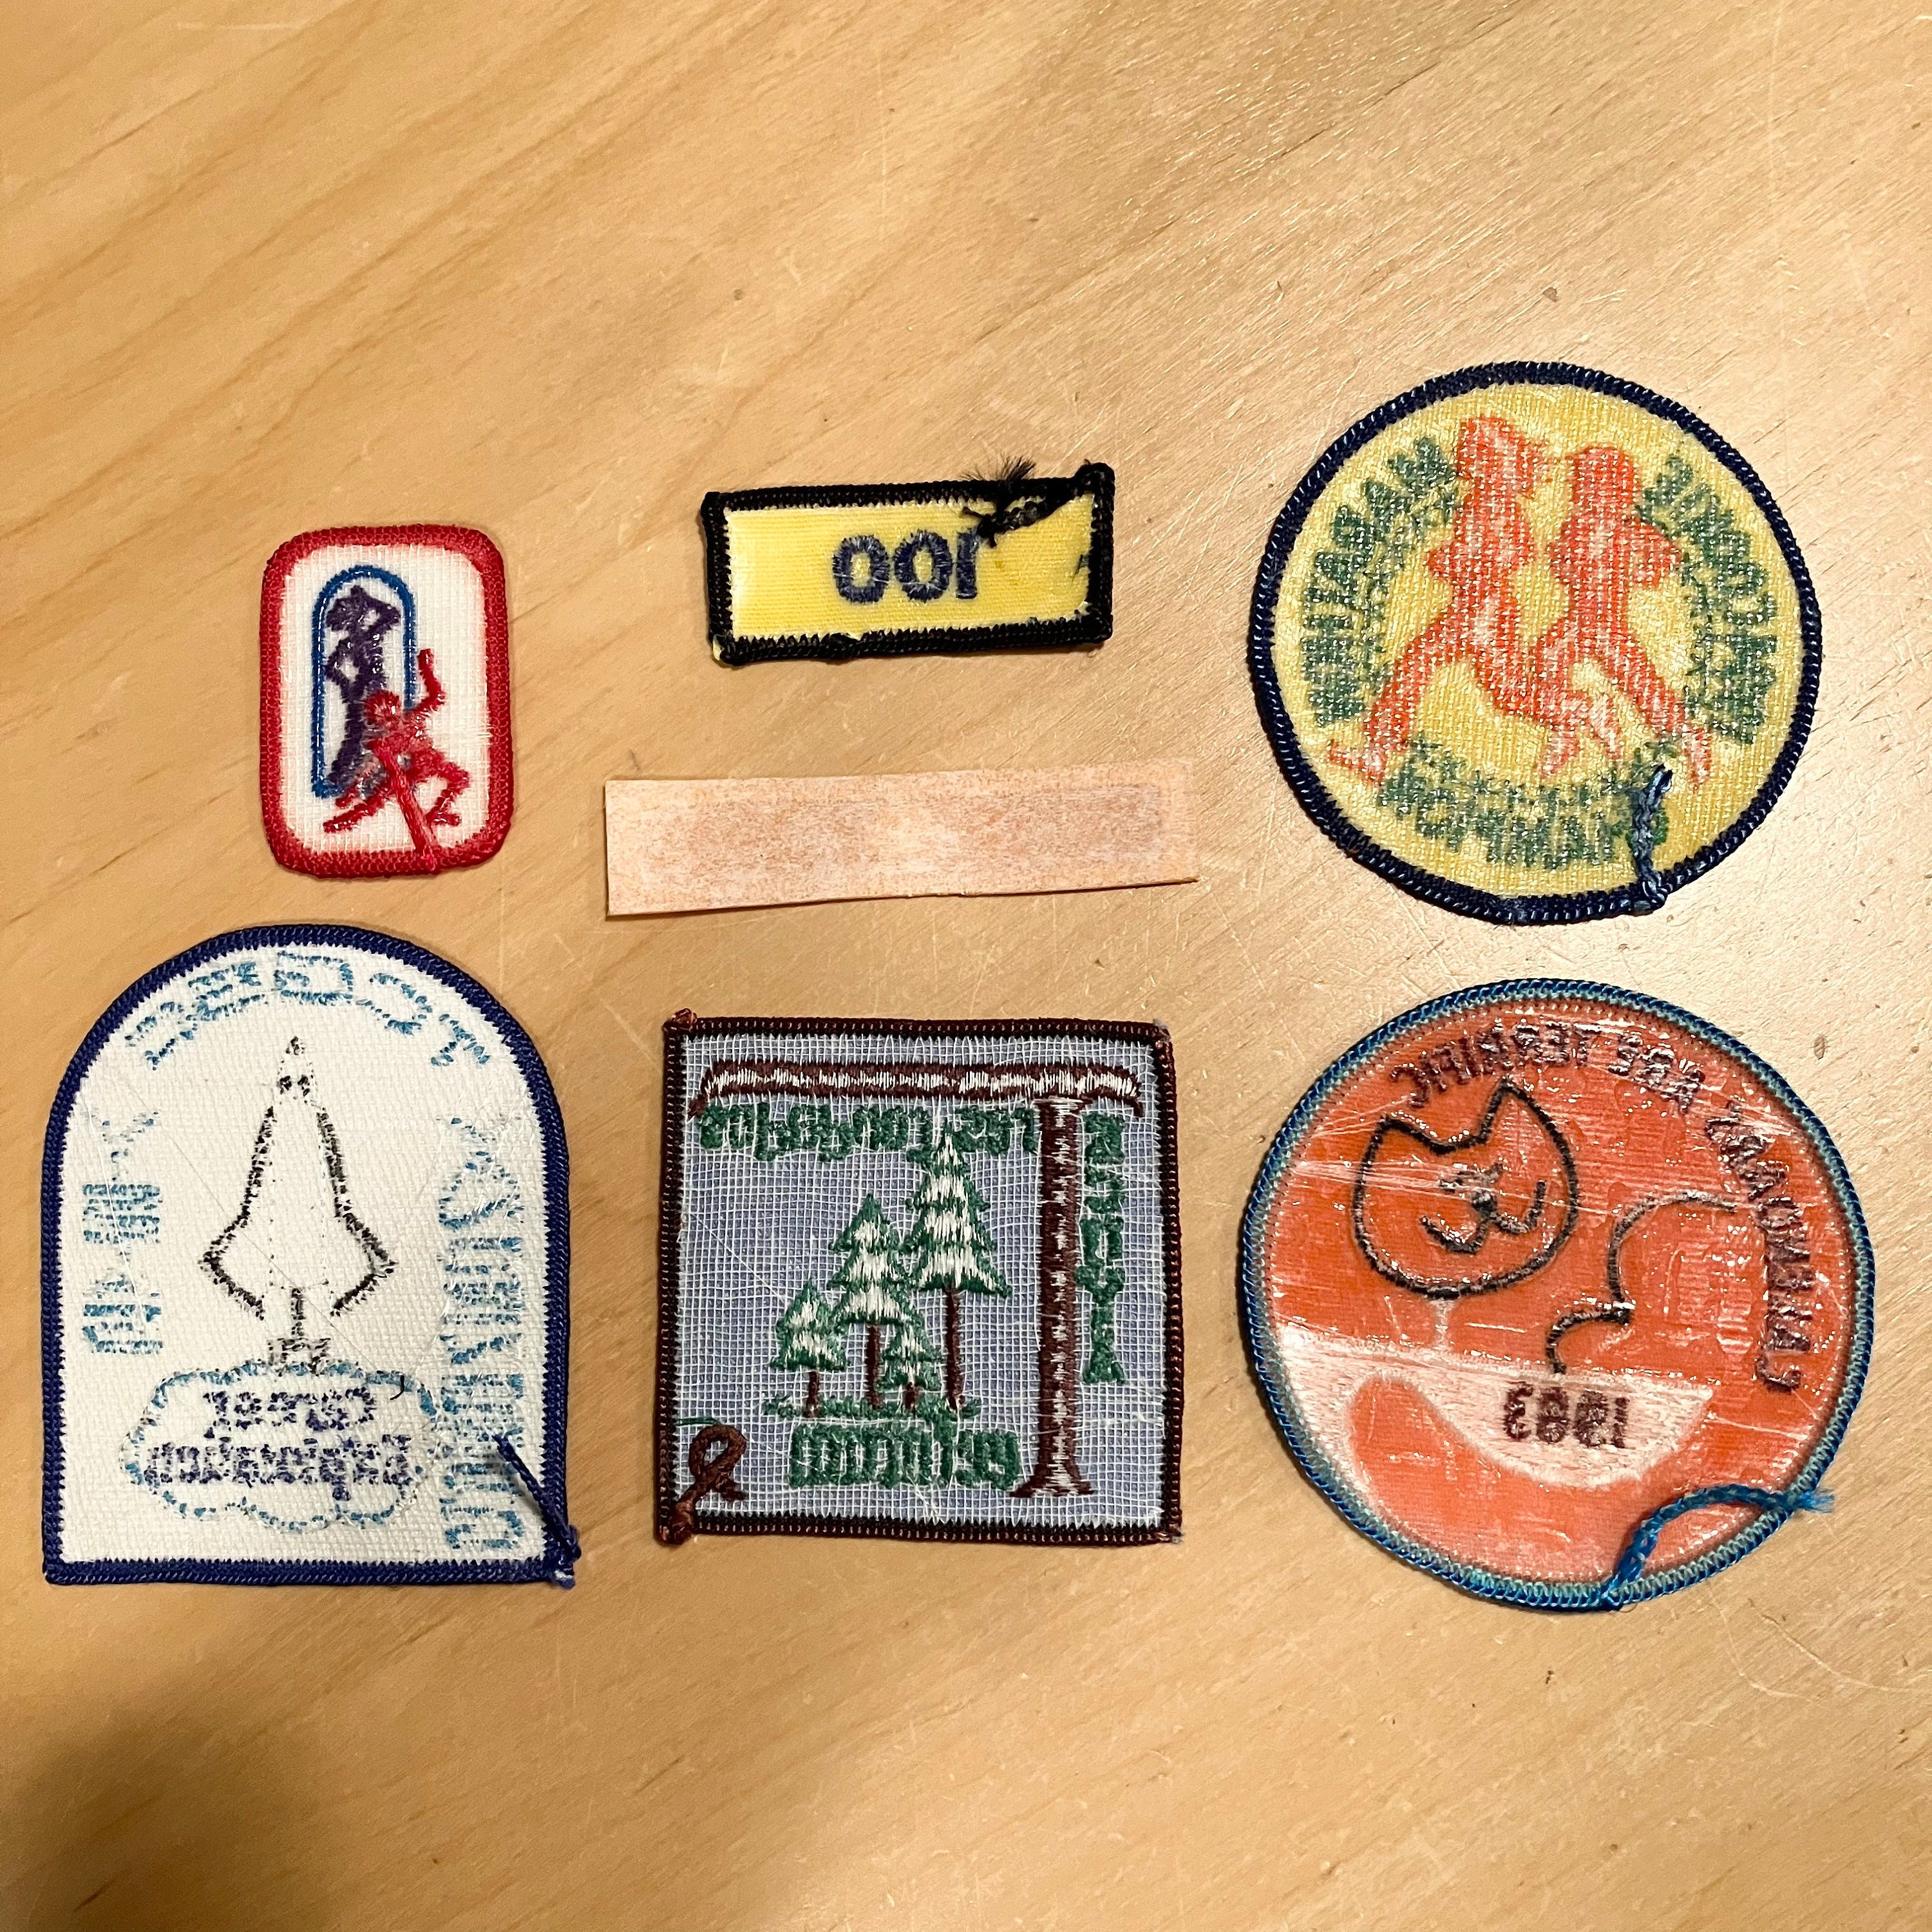 Lot of 7 Vintage 1980s Girl Scout Patches Cat Patch 80s Craft Supply  Appliqué Girl Scout Costume Cookies Patch Badges 